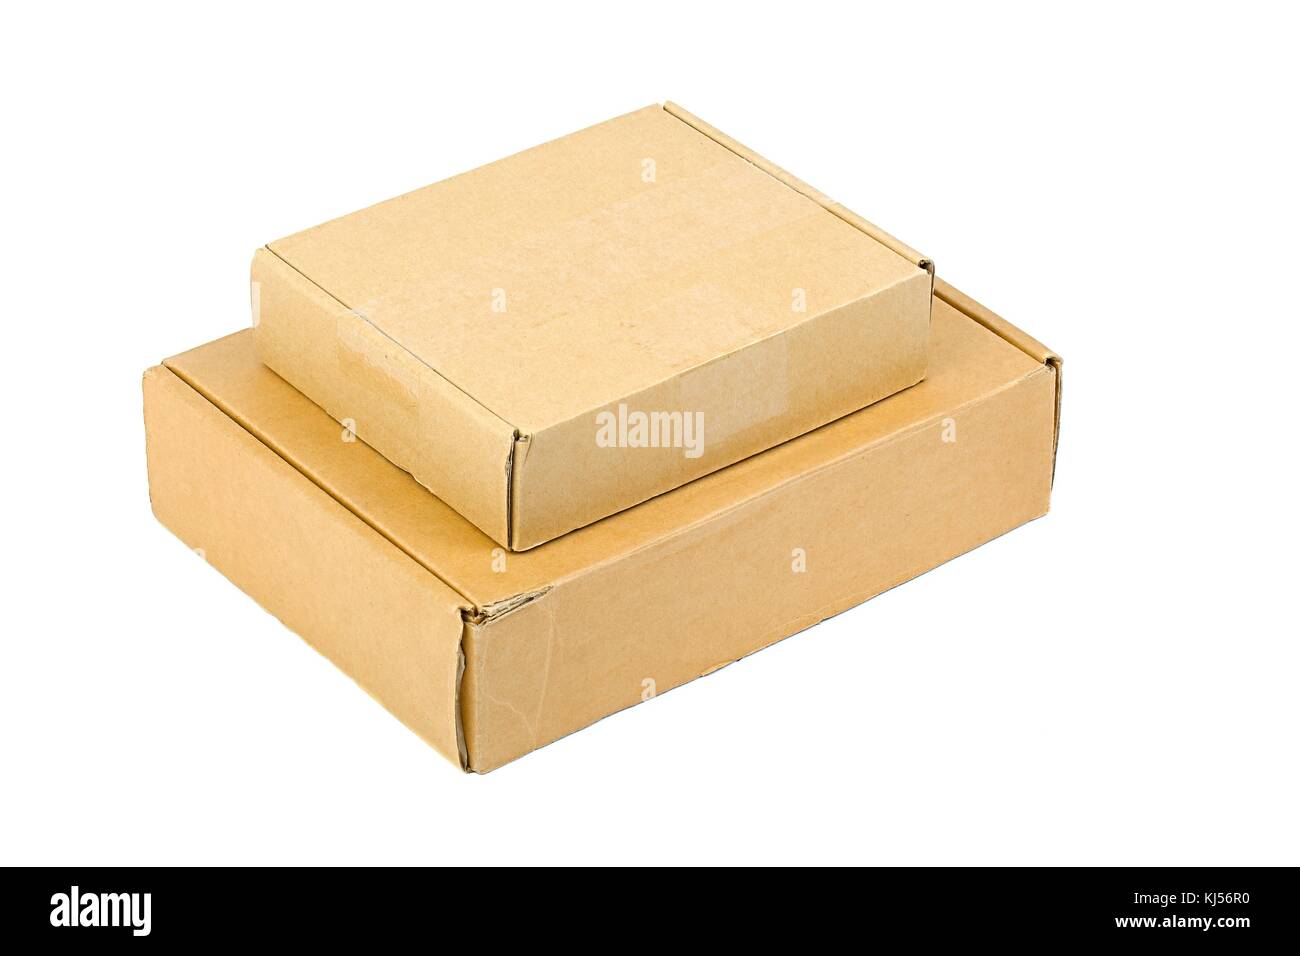 Two cardboard boxes on white background Stock Photo